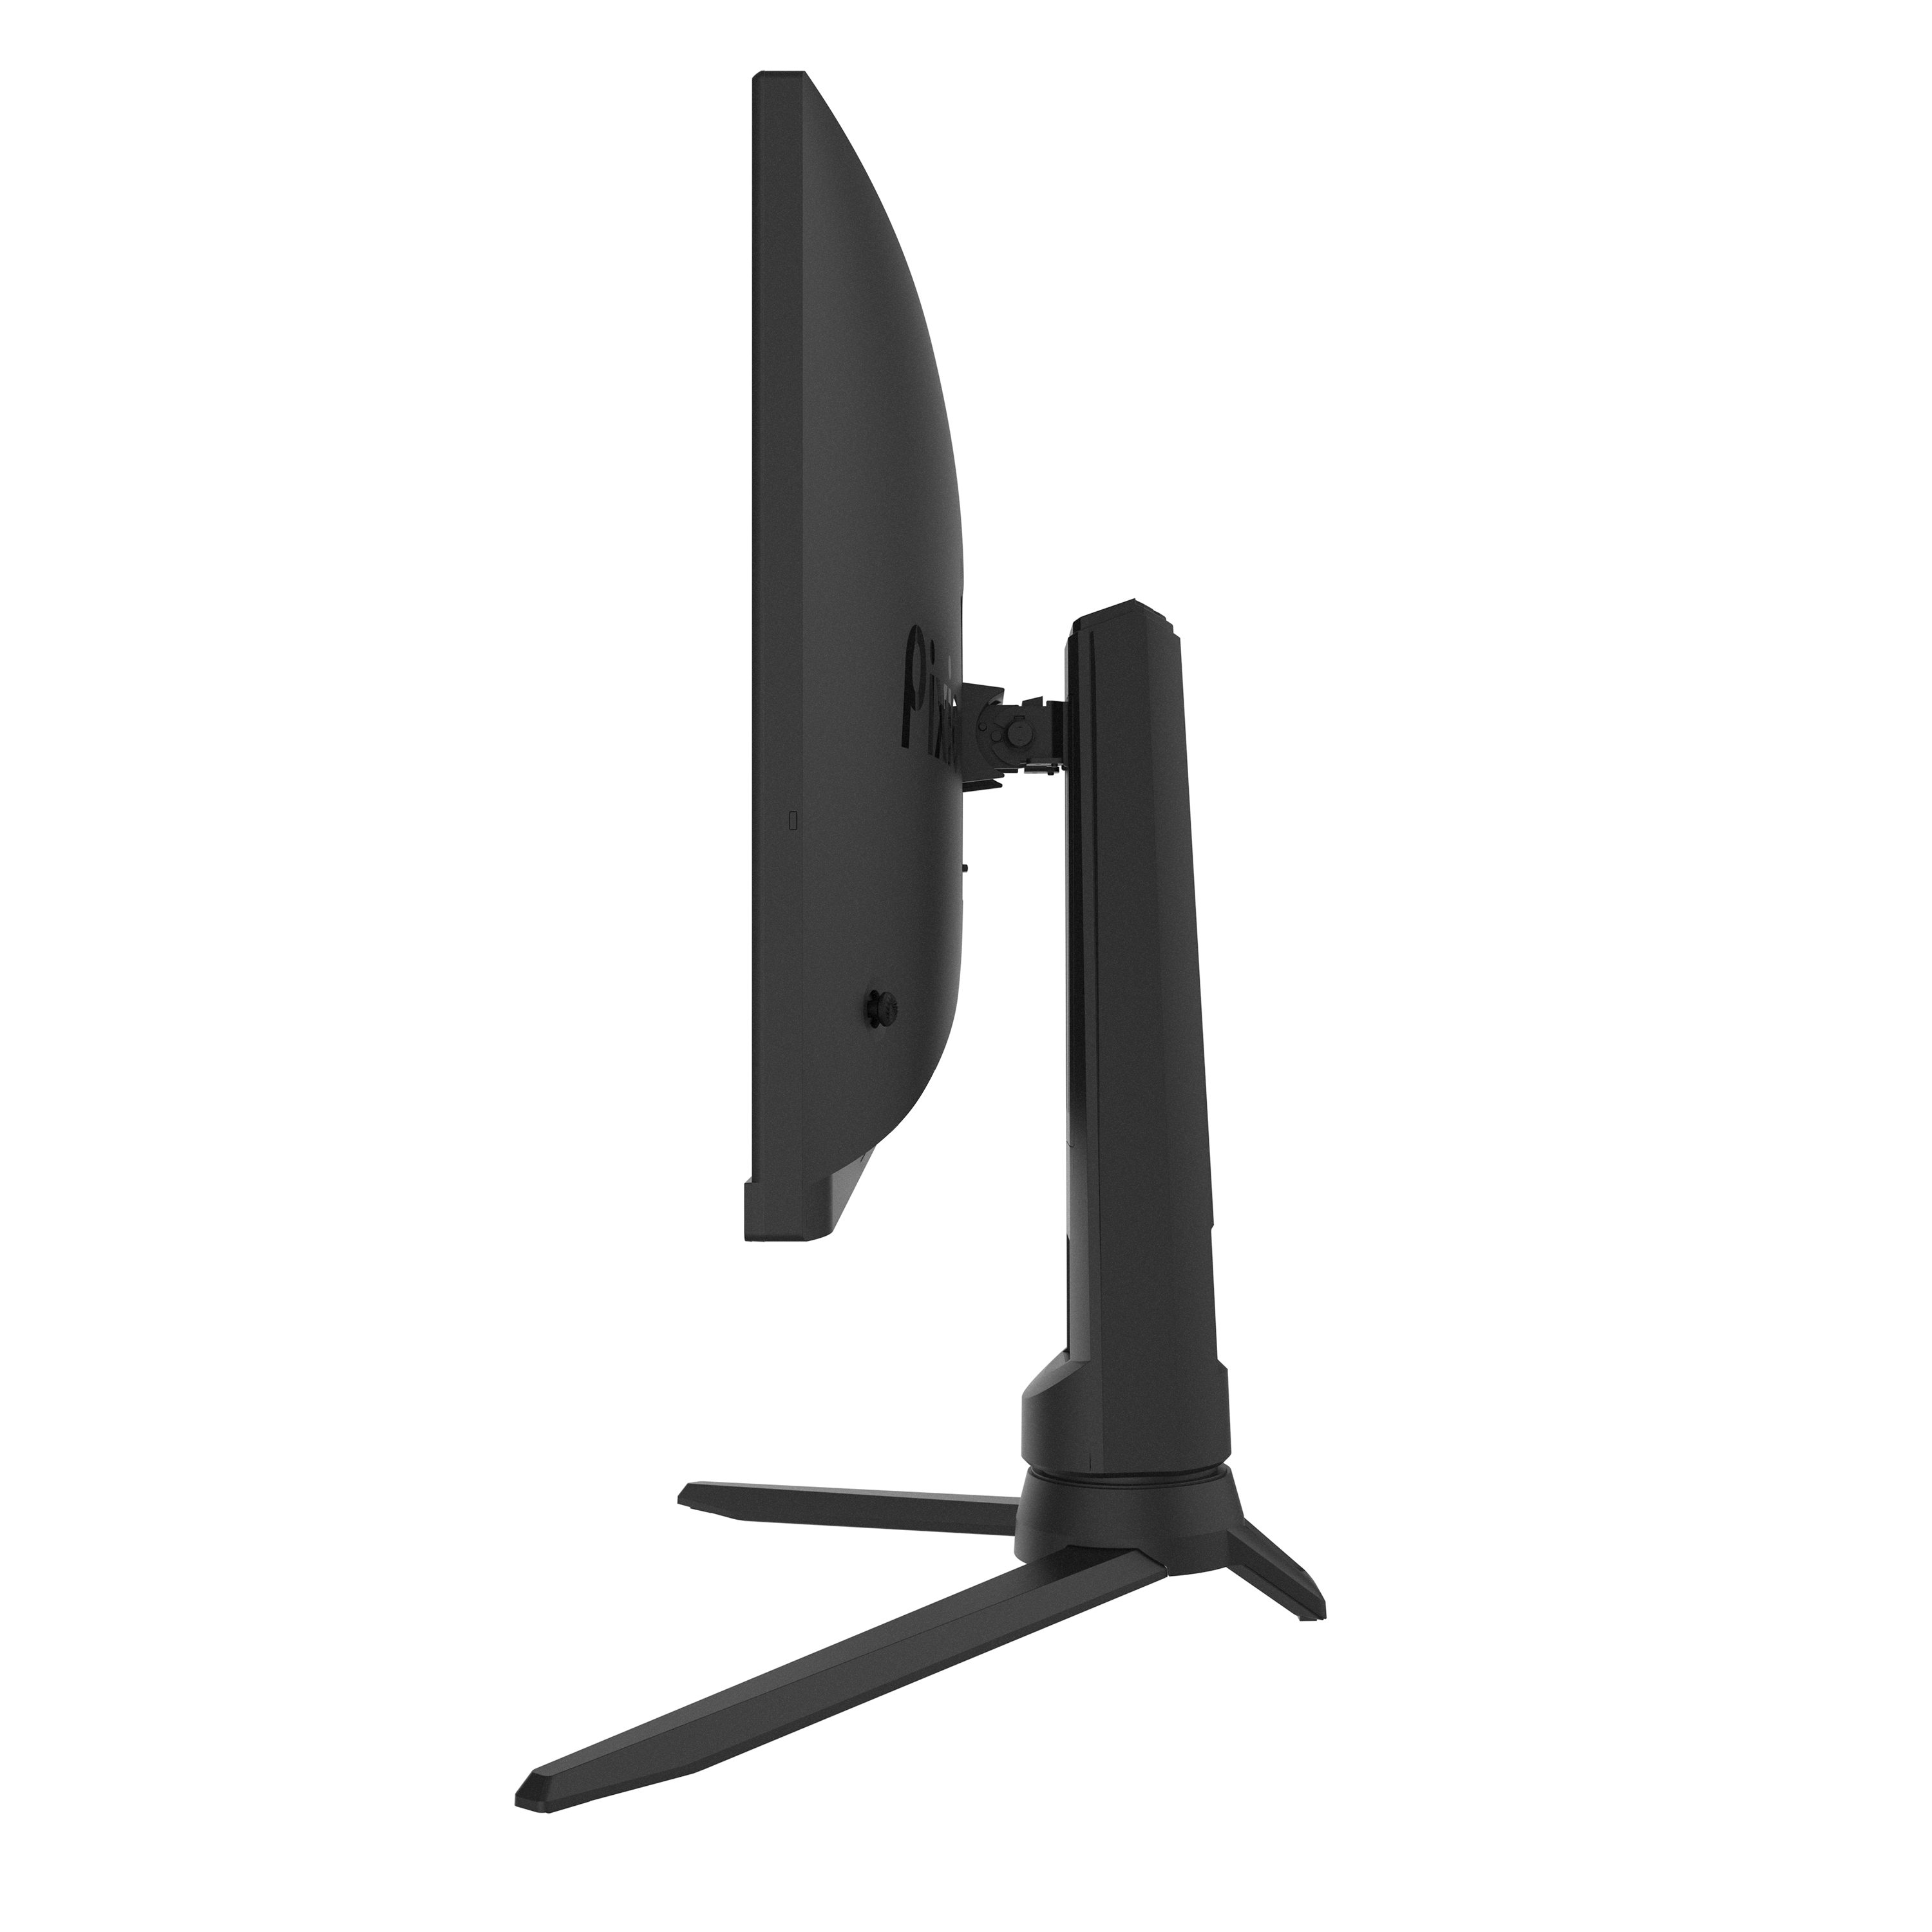 PX248 Pro Gaming Monitor